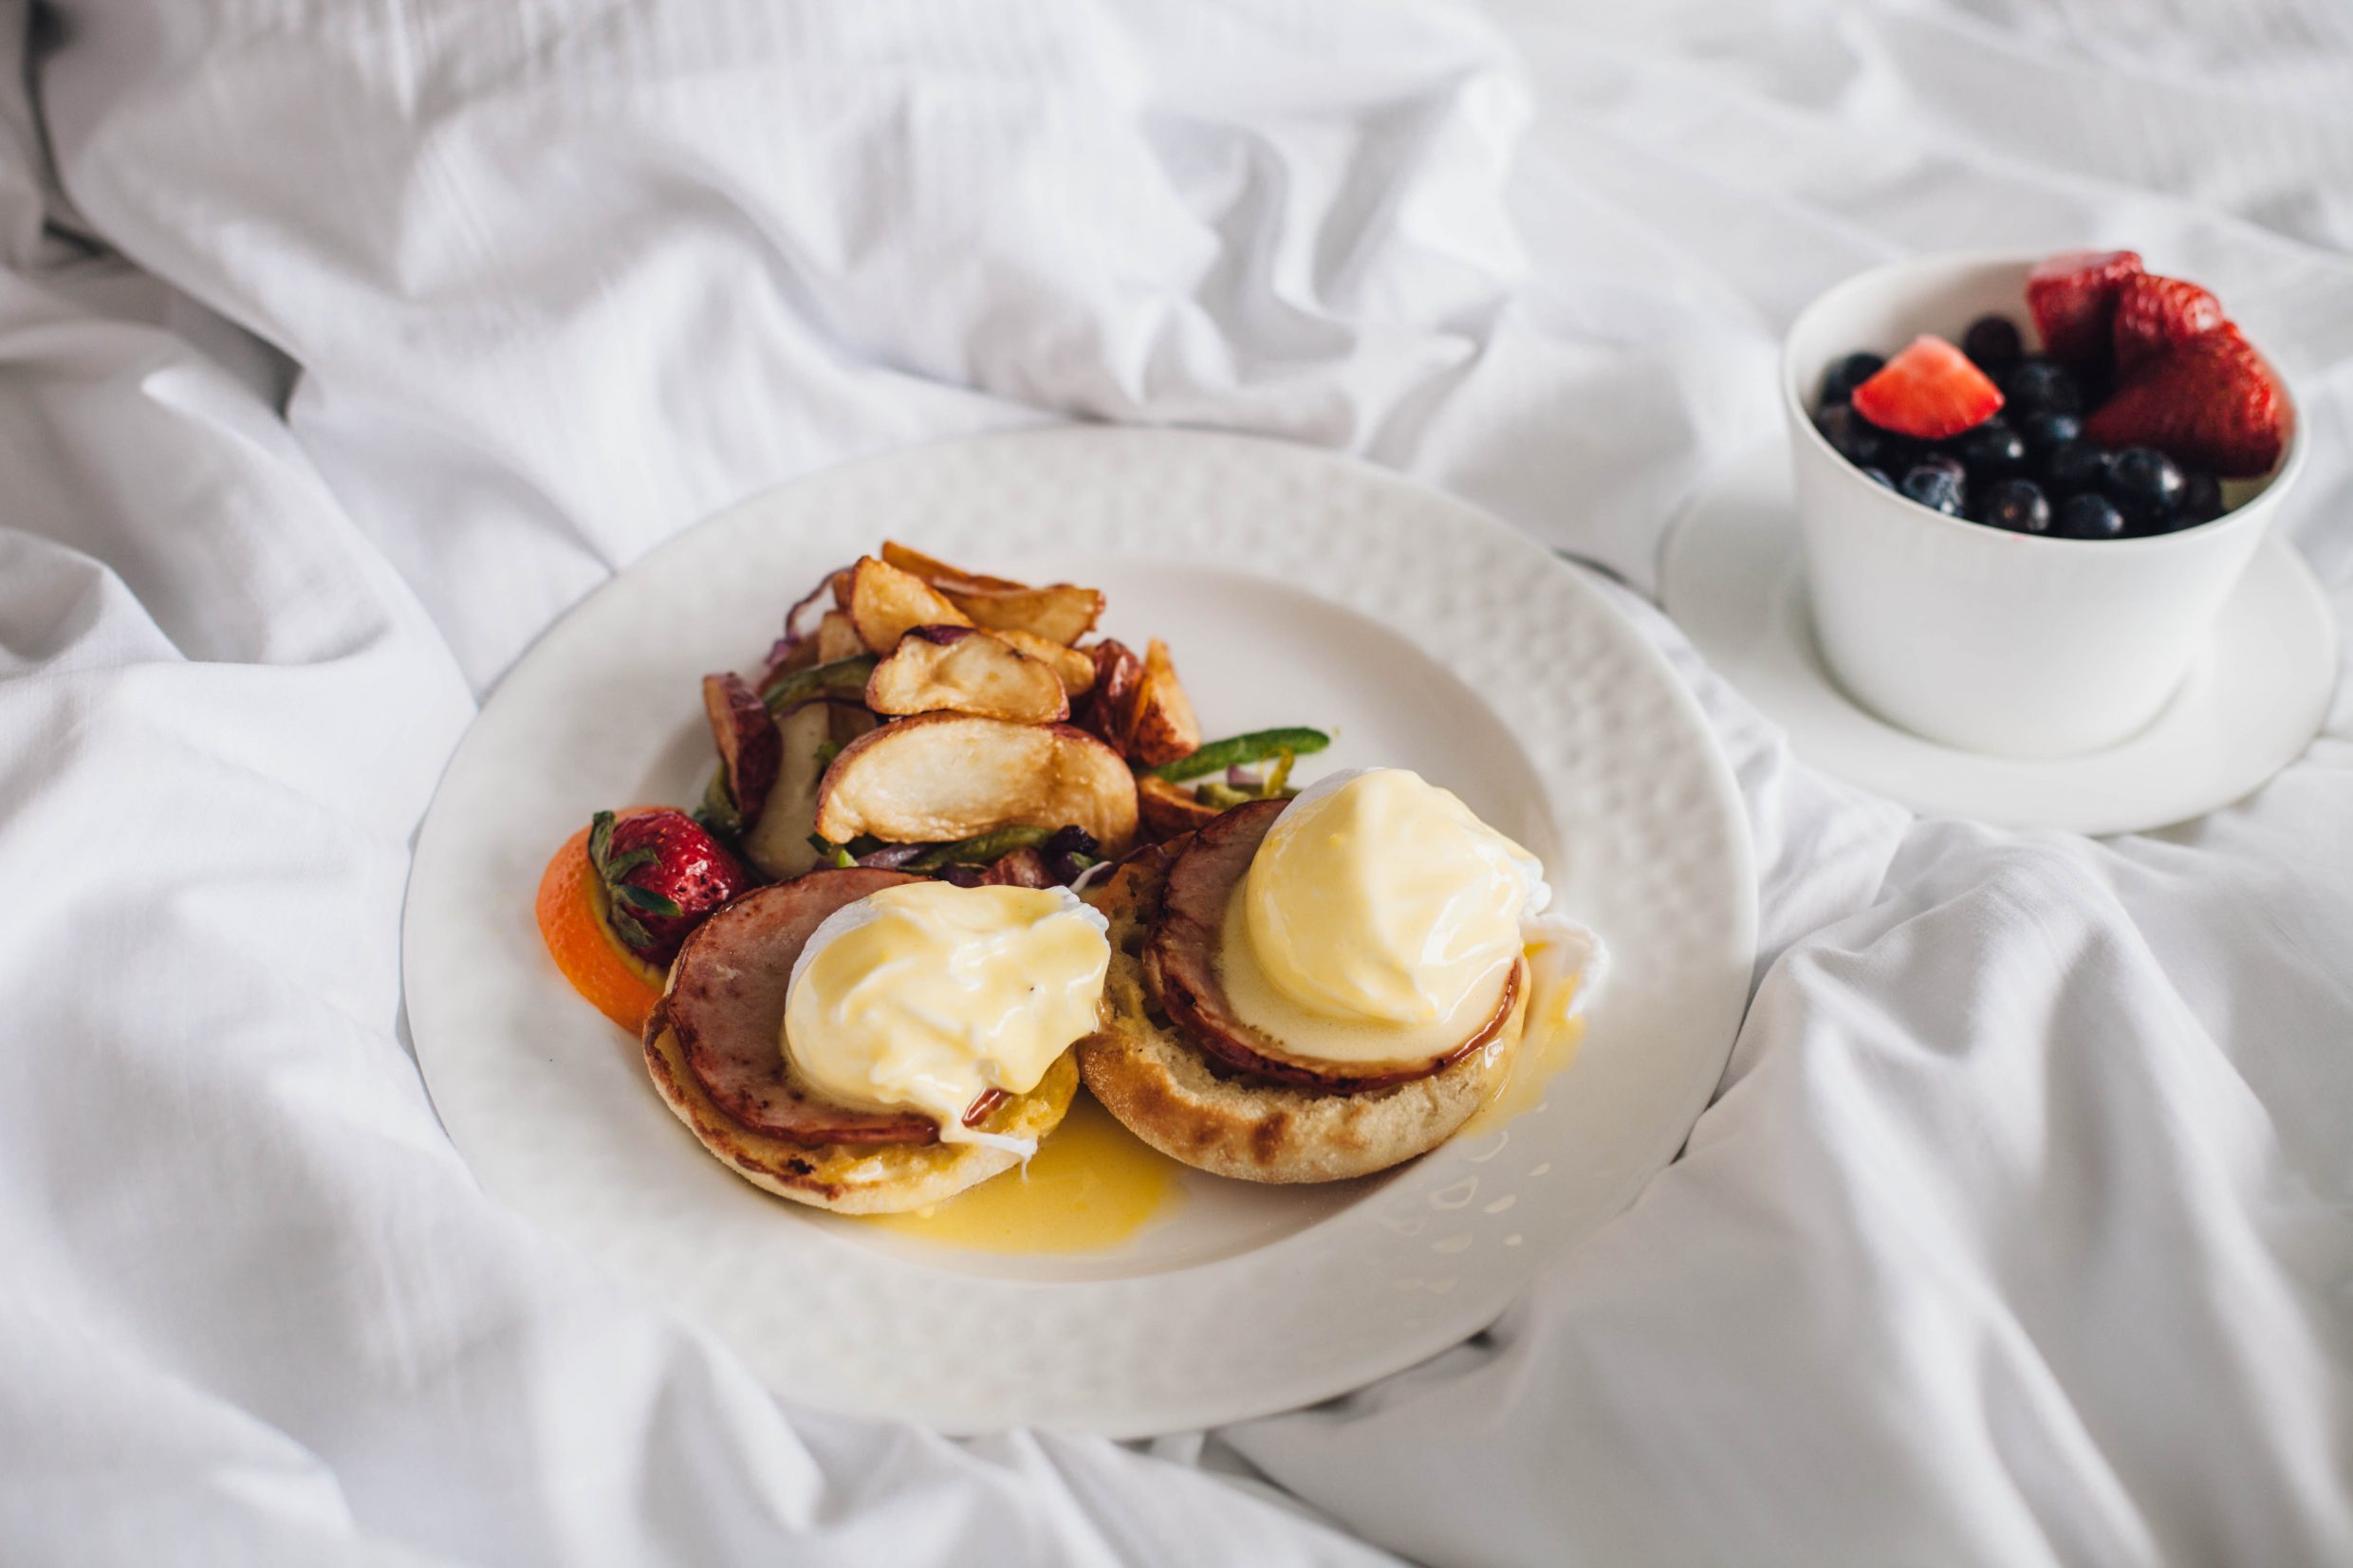 COLOR & CHIC | A staycation at Hilton Norfolk The Main - breakfast in bed with eggs benedict and fresh berries